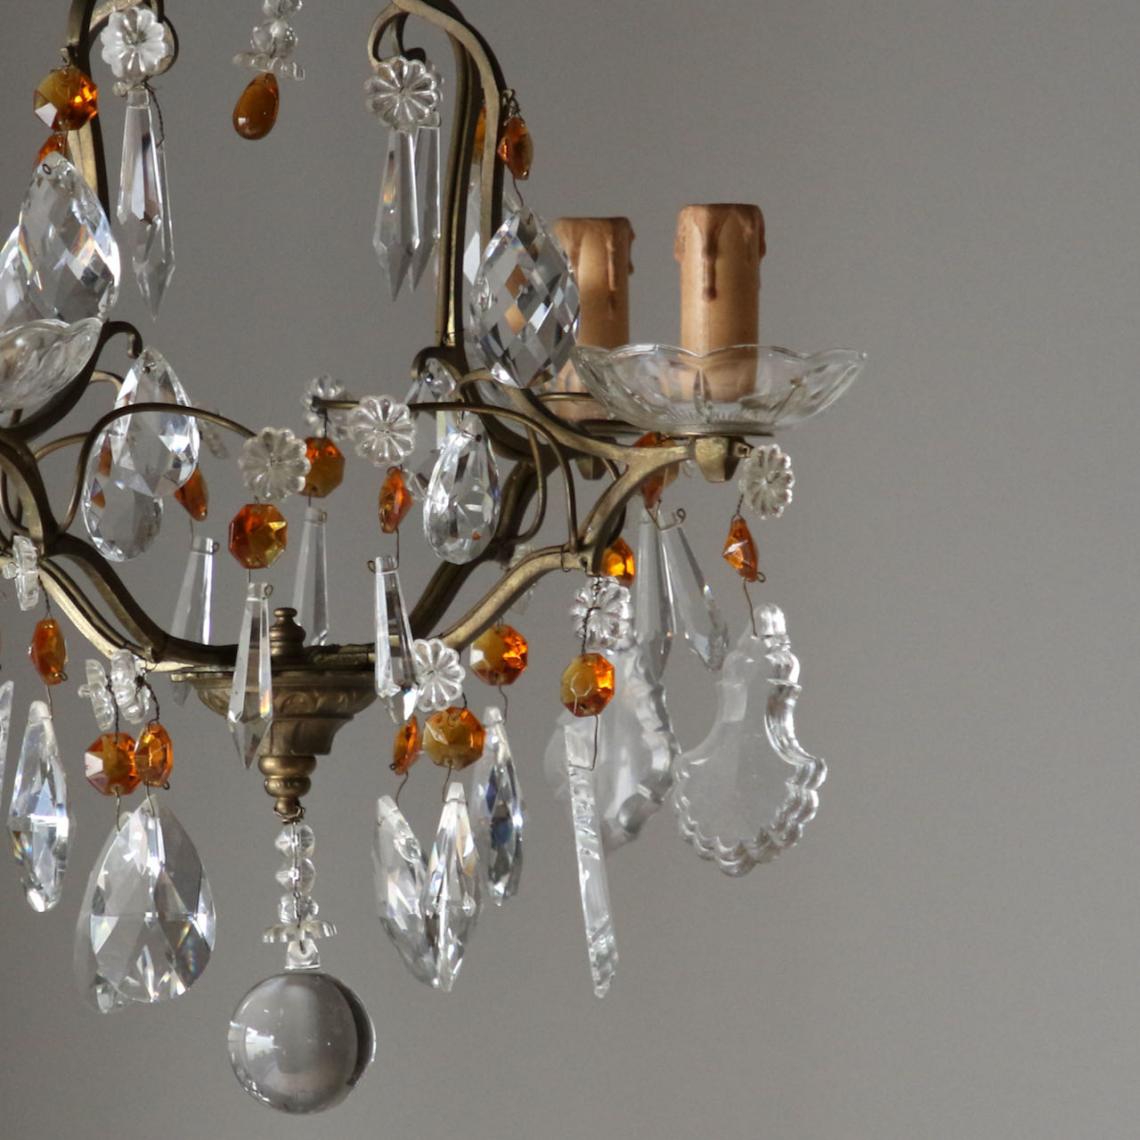 Chandelier with Amber Glass